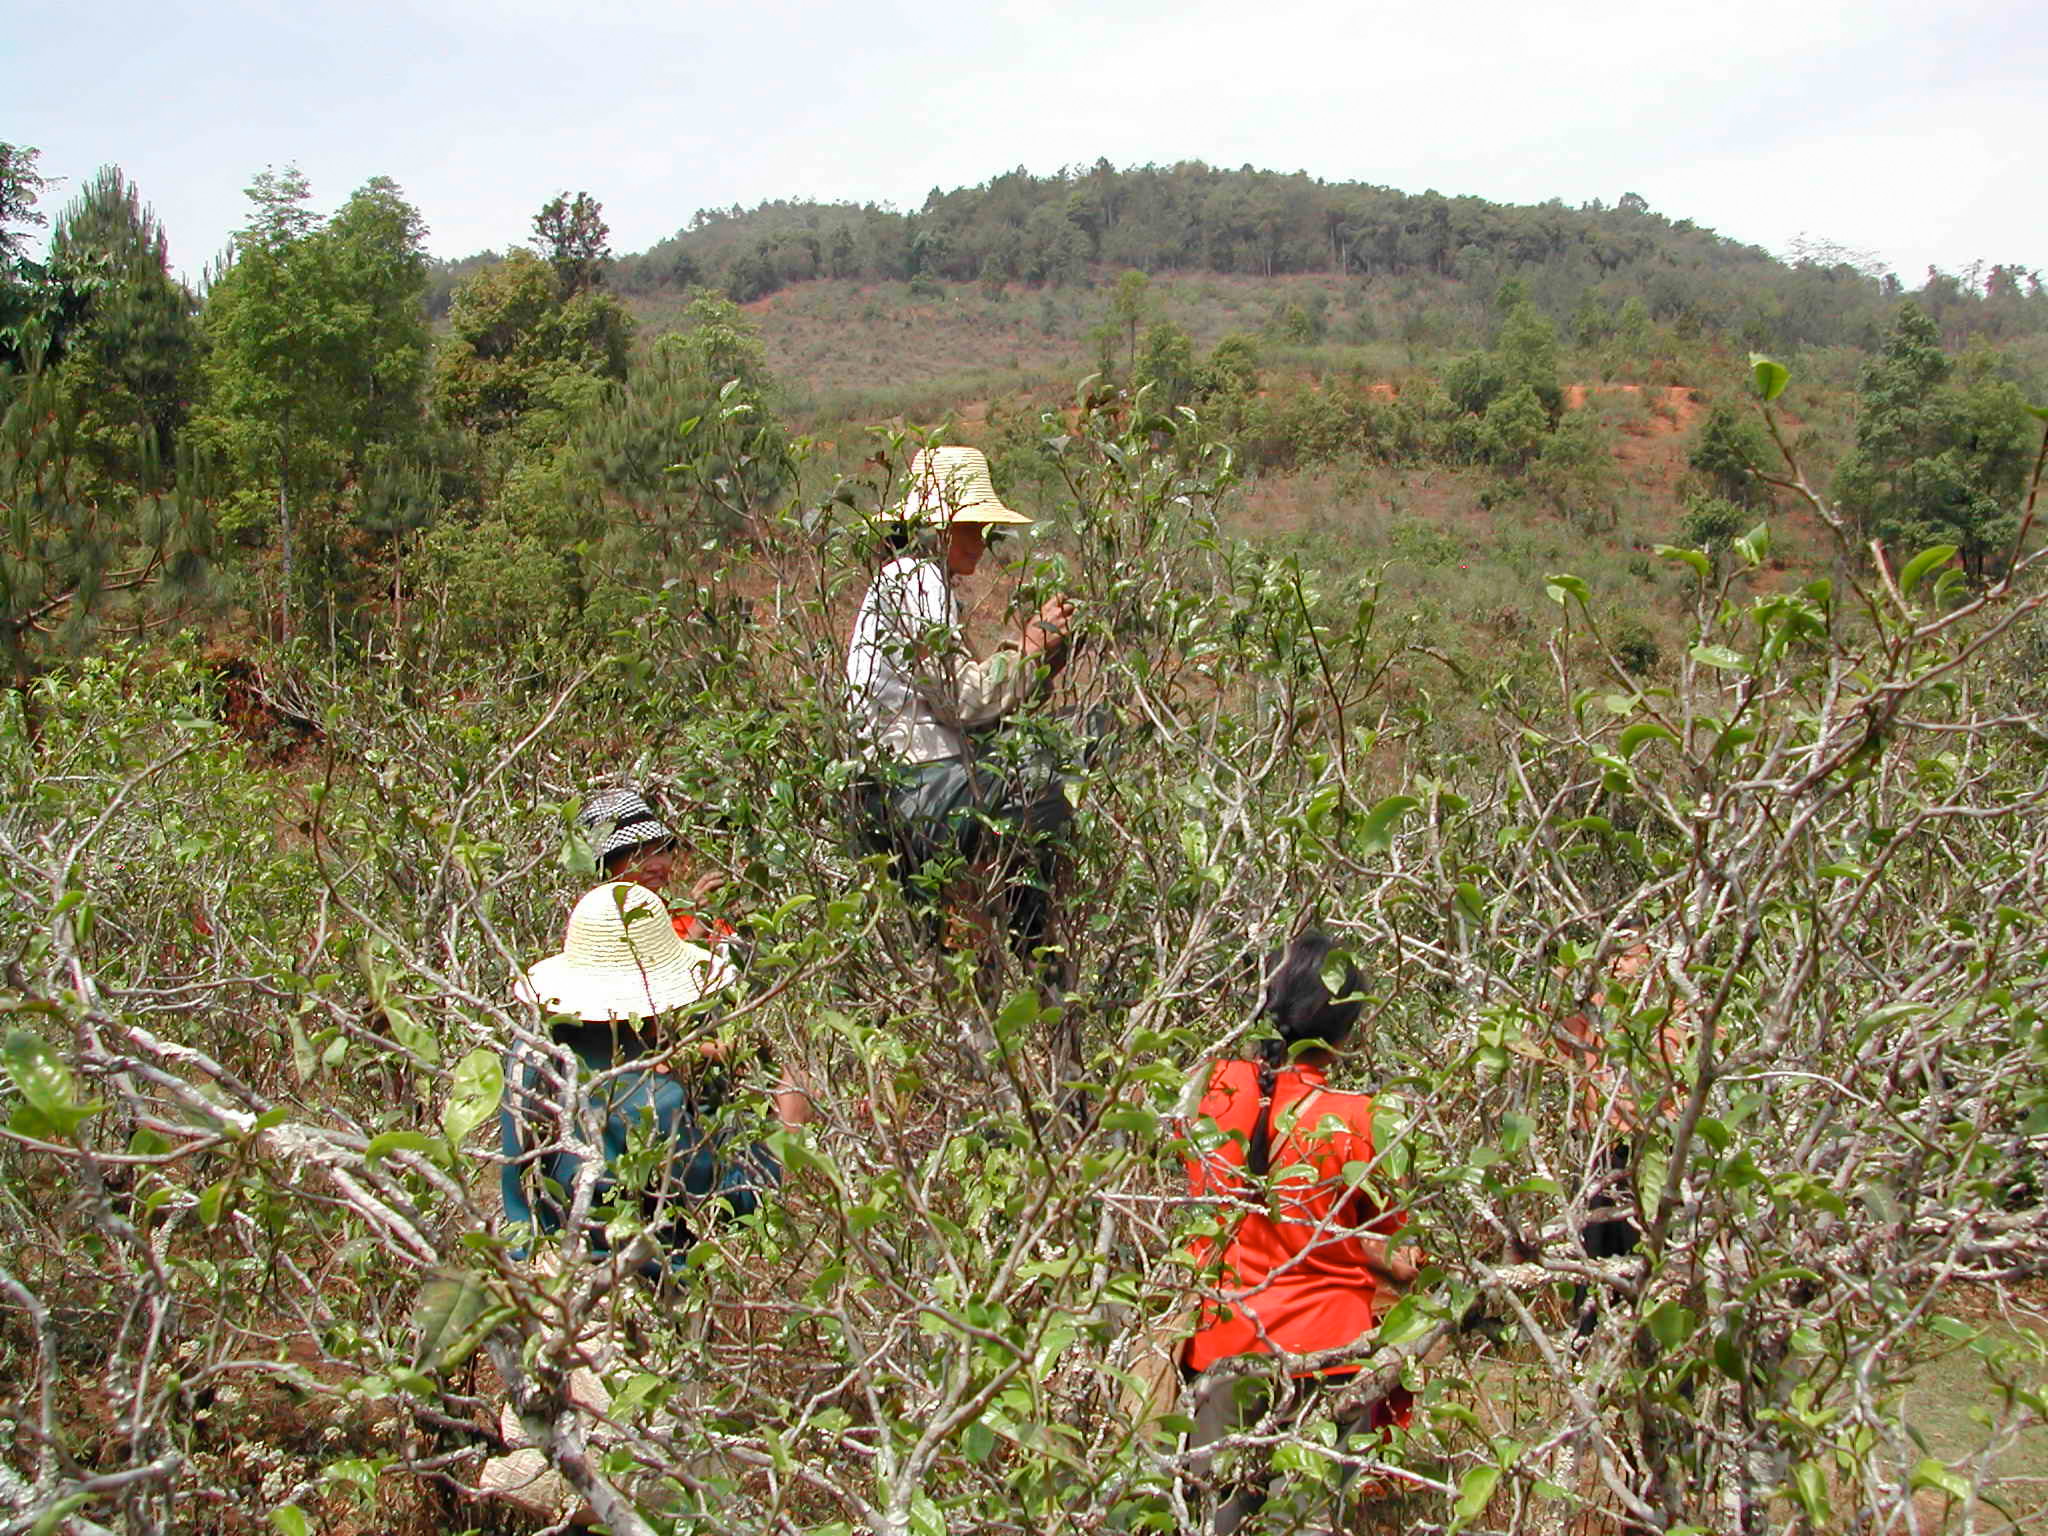 Three tea pickers among the tea trees of Mengku in Yunnan Province, one perched in the branches.